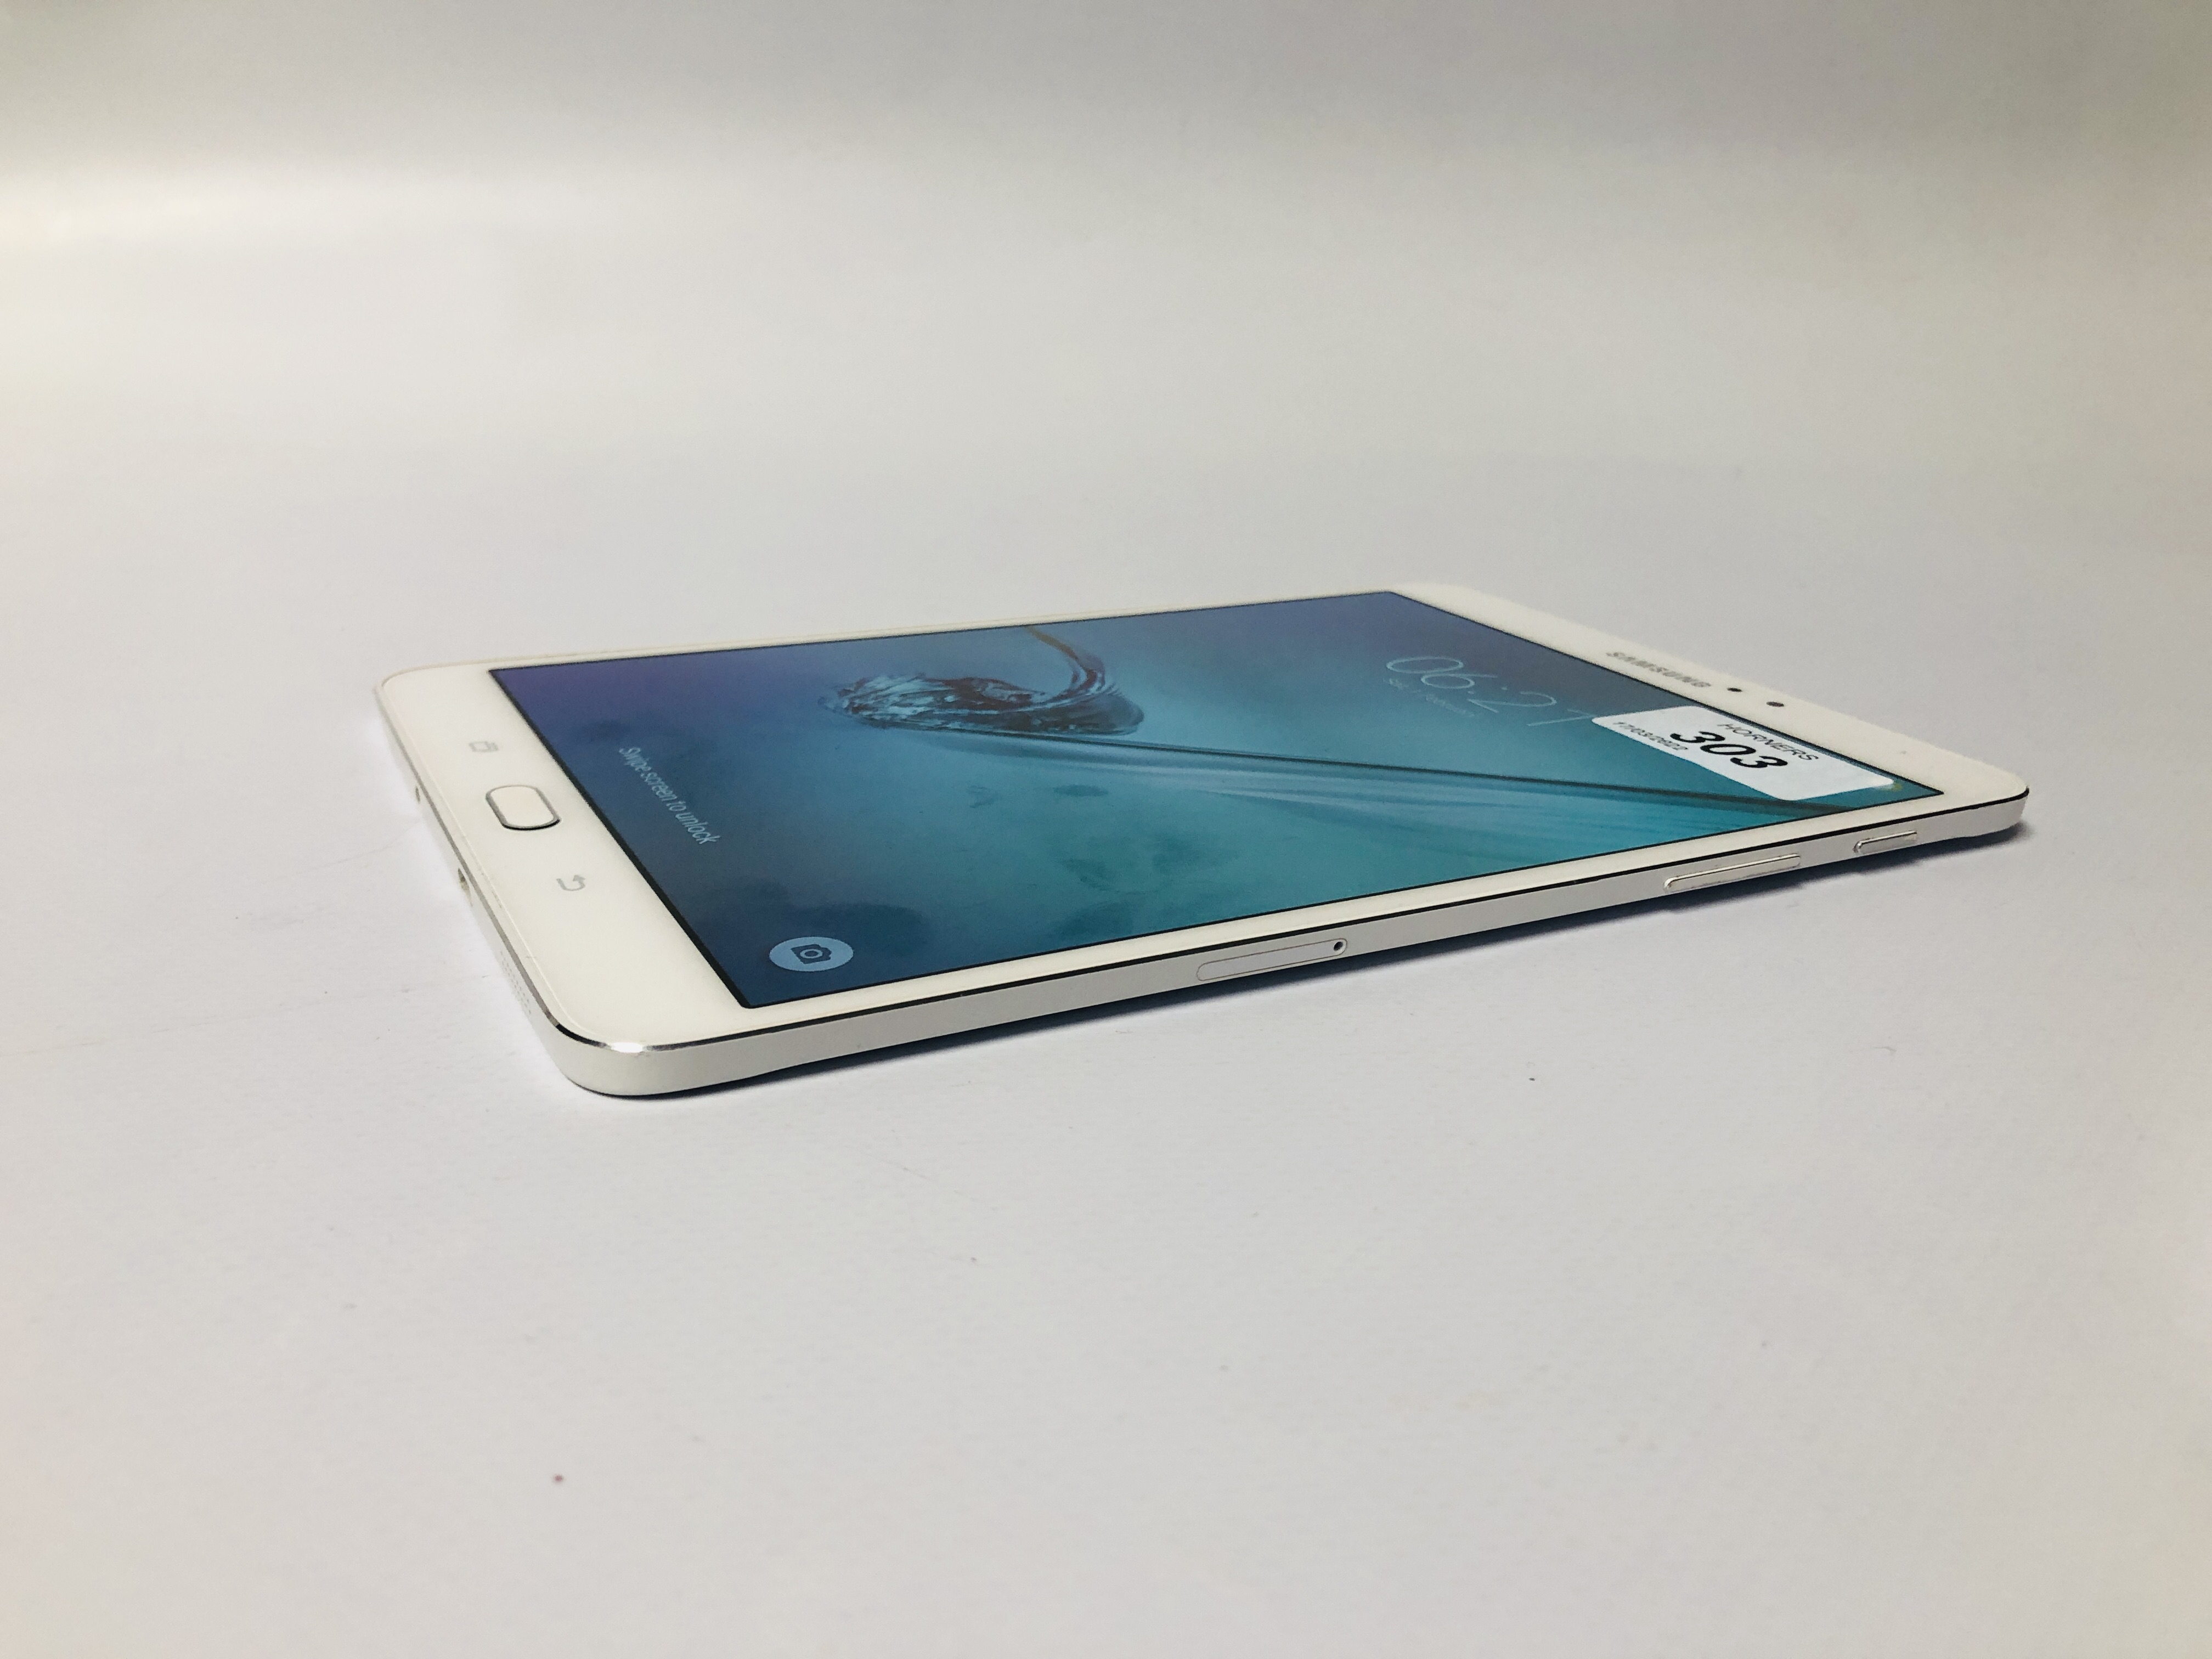 SAMSUNG GALAXY TAB S2 TABLET MODEL SM - T710 - SOLD AS SEEN - Image 3 of 6